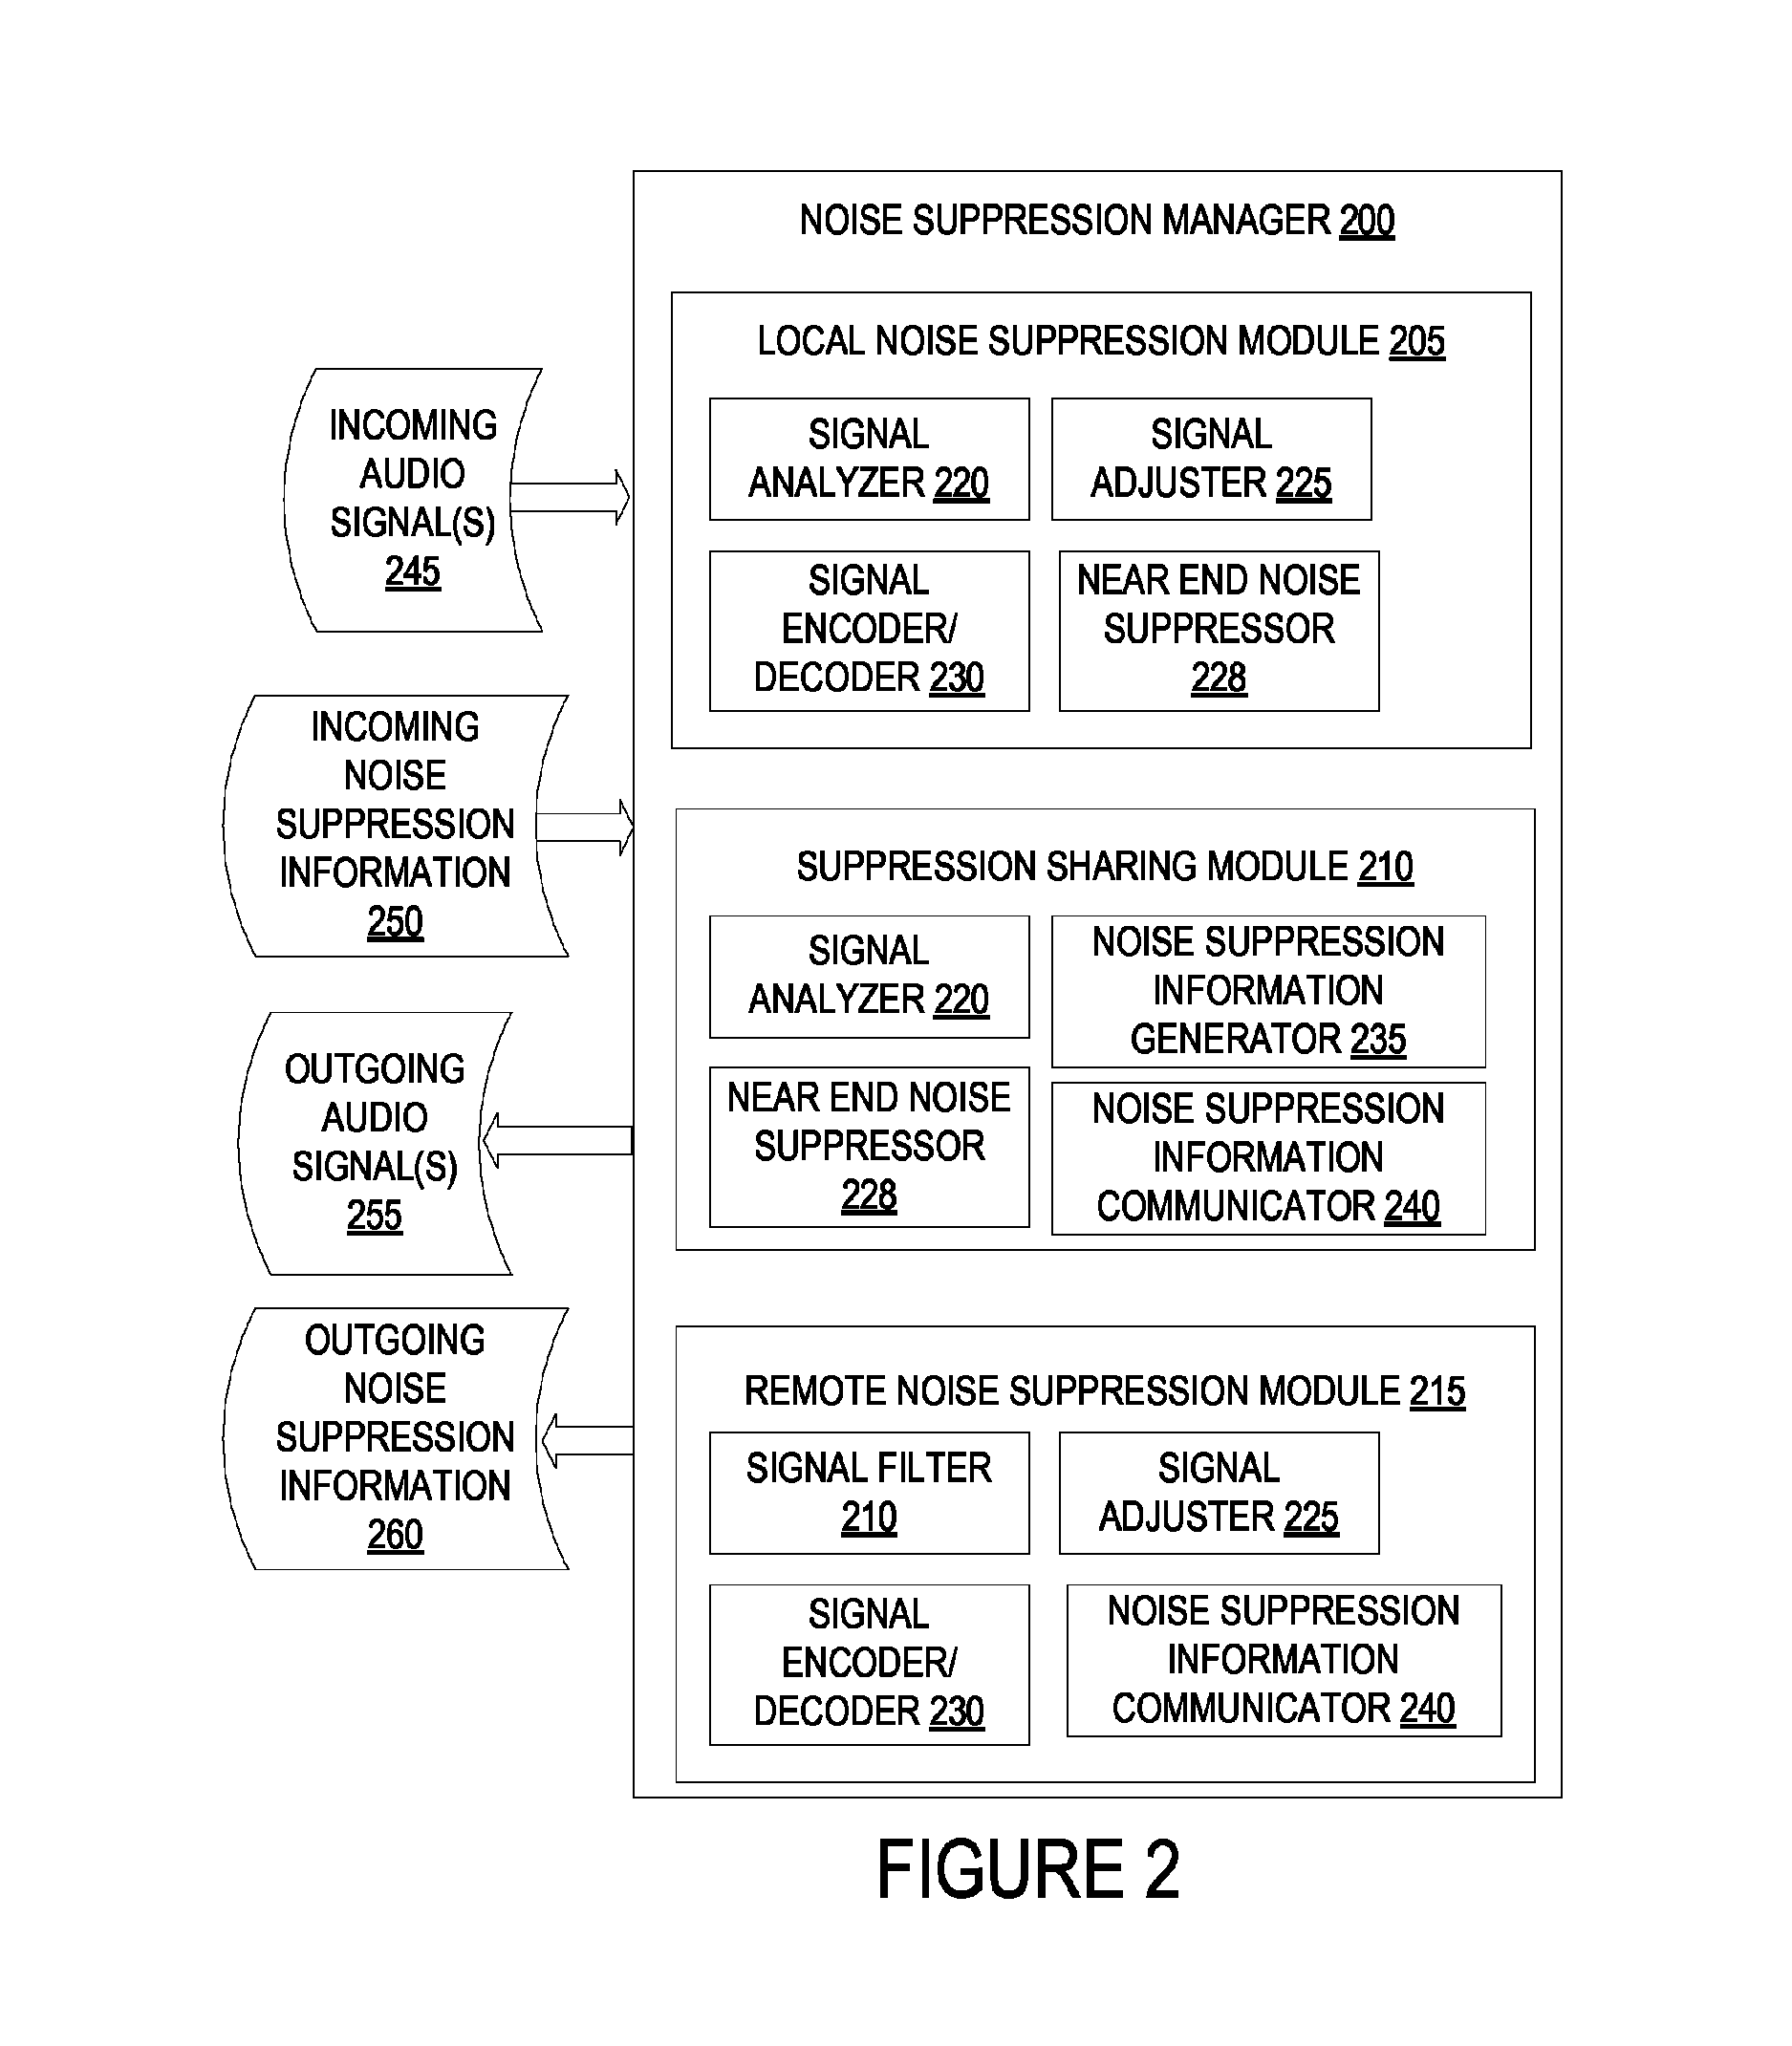 Transmission of noise compensation information between devices